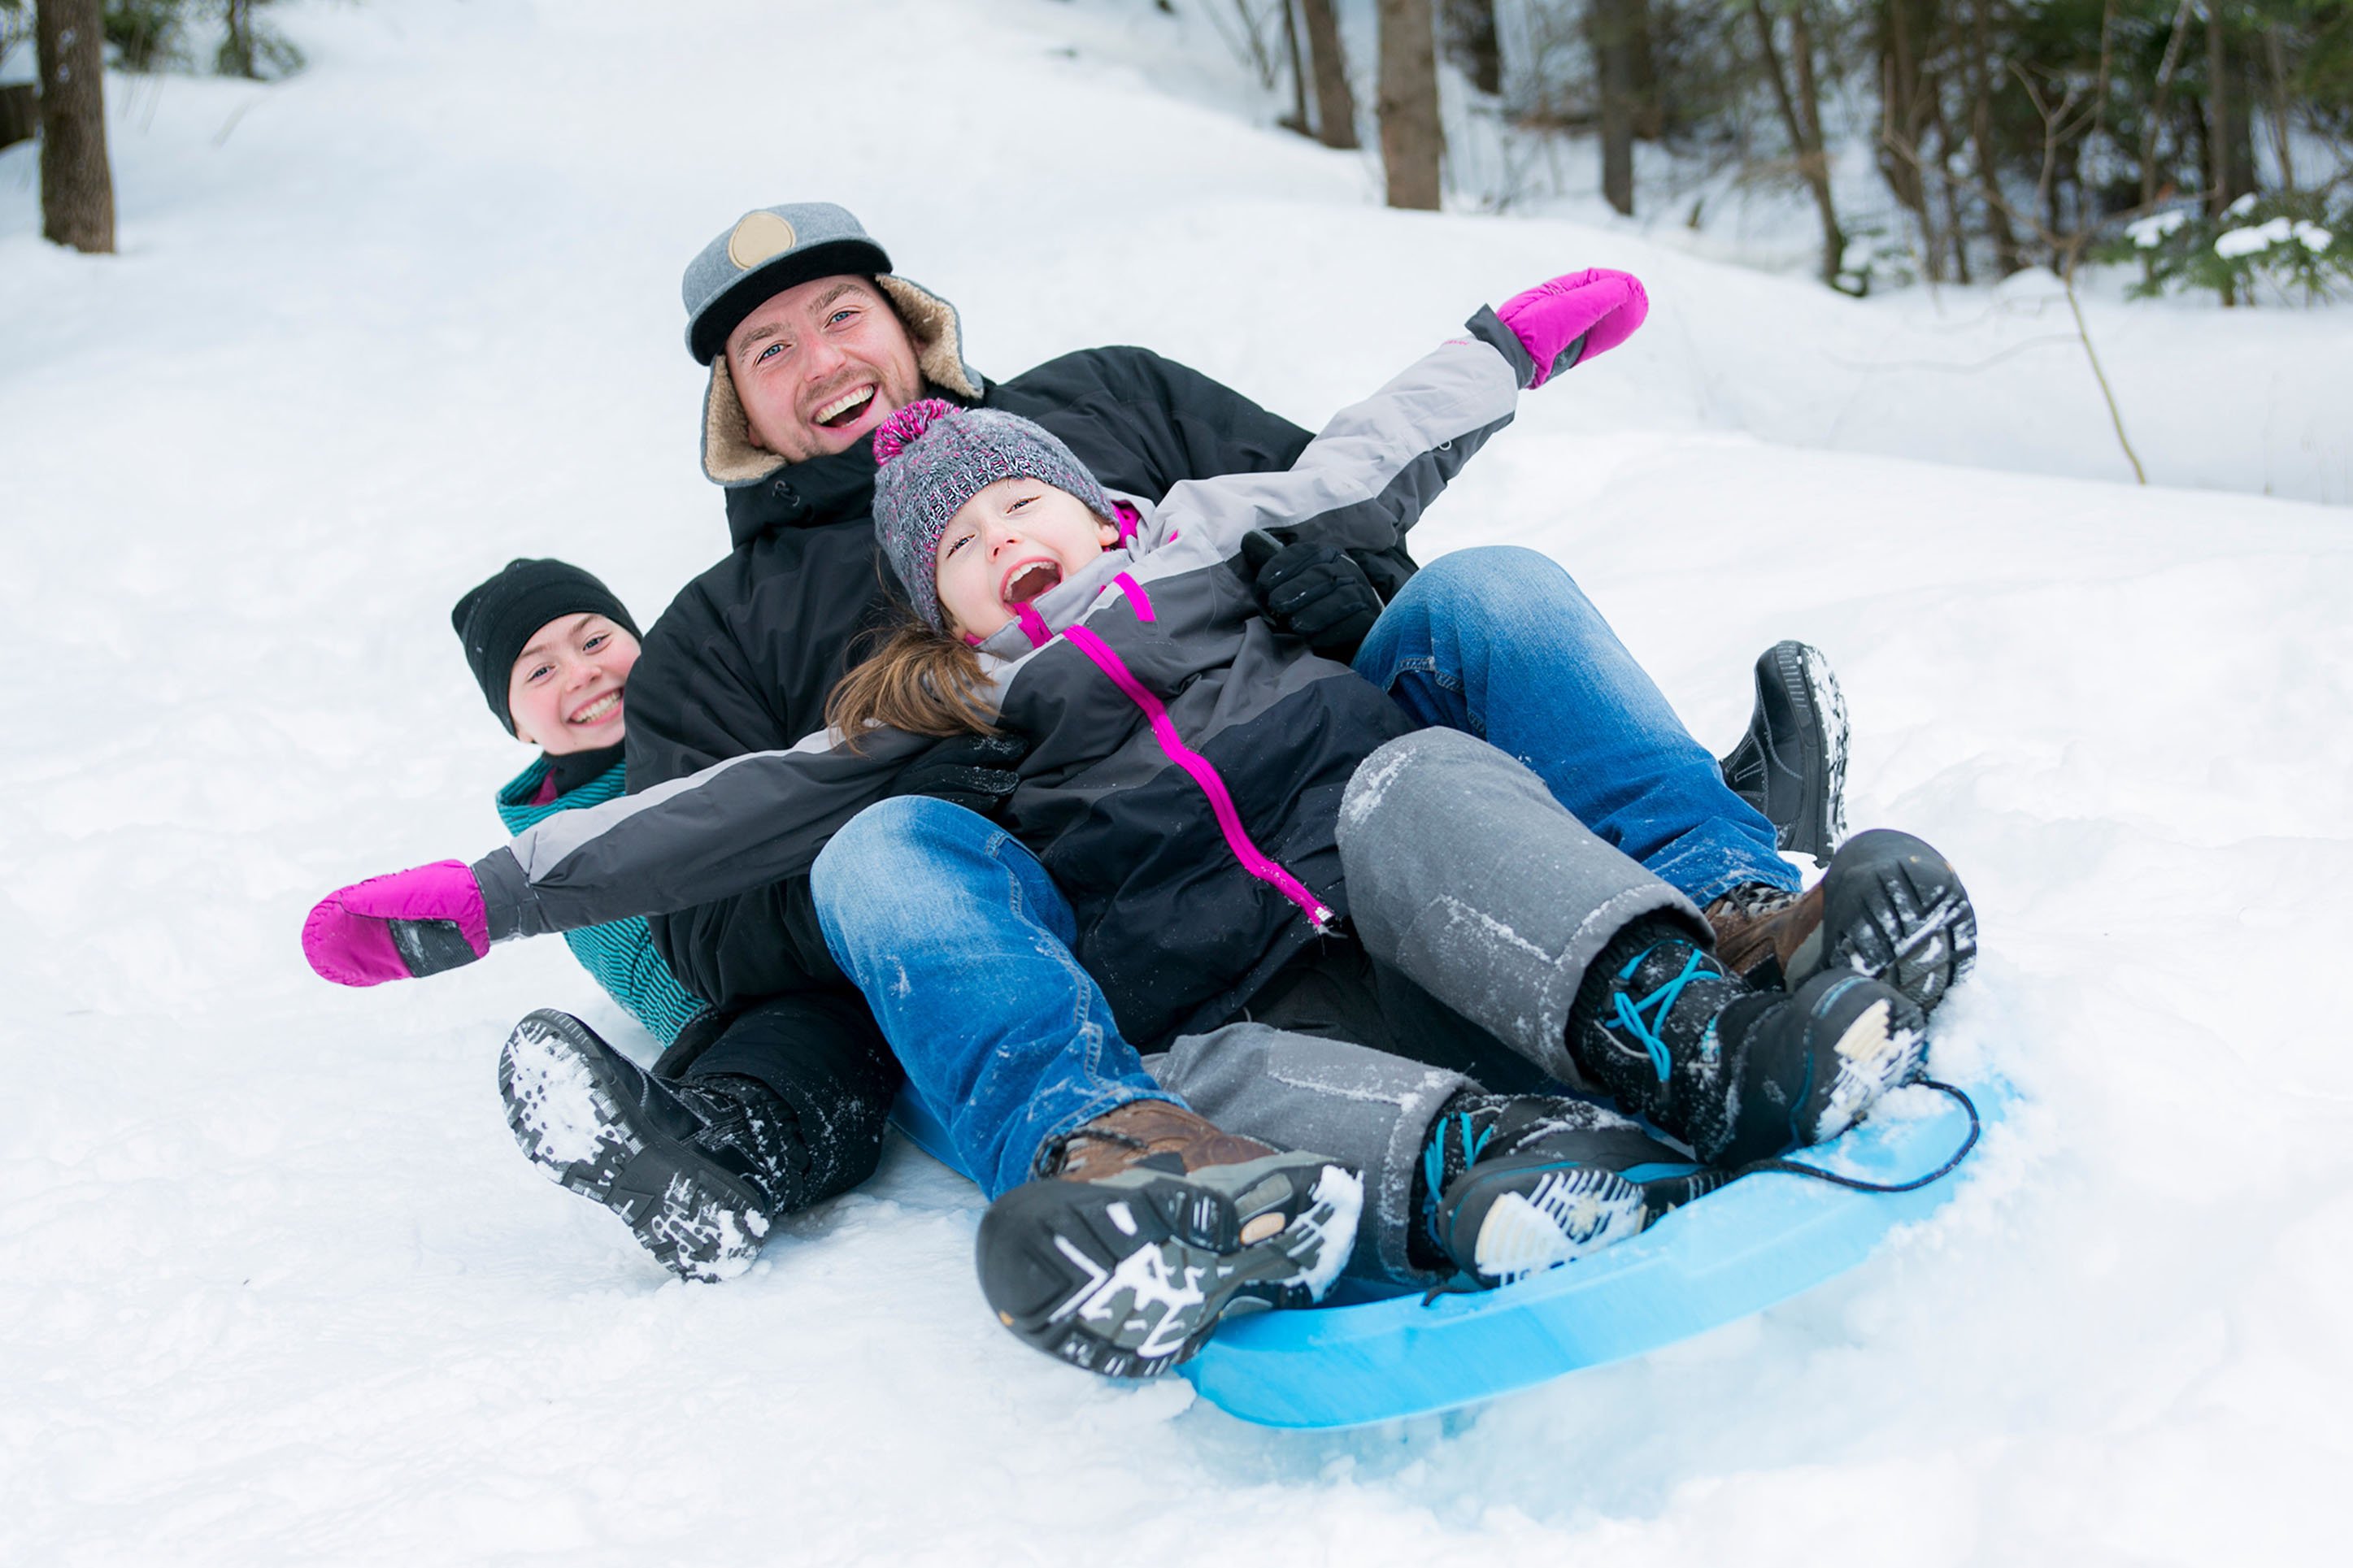 Dad sledding with two kids